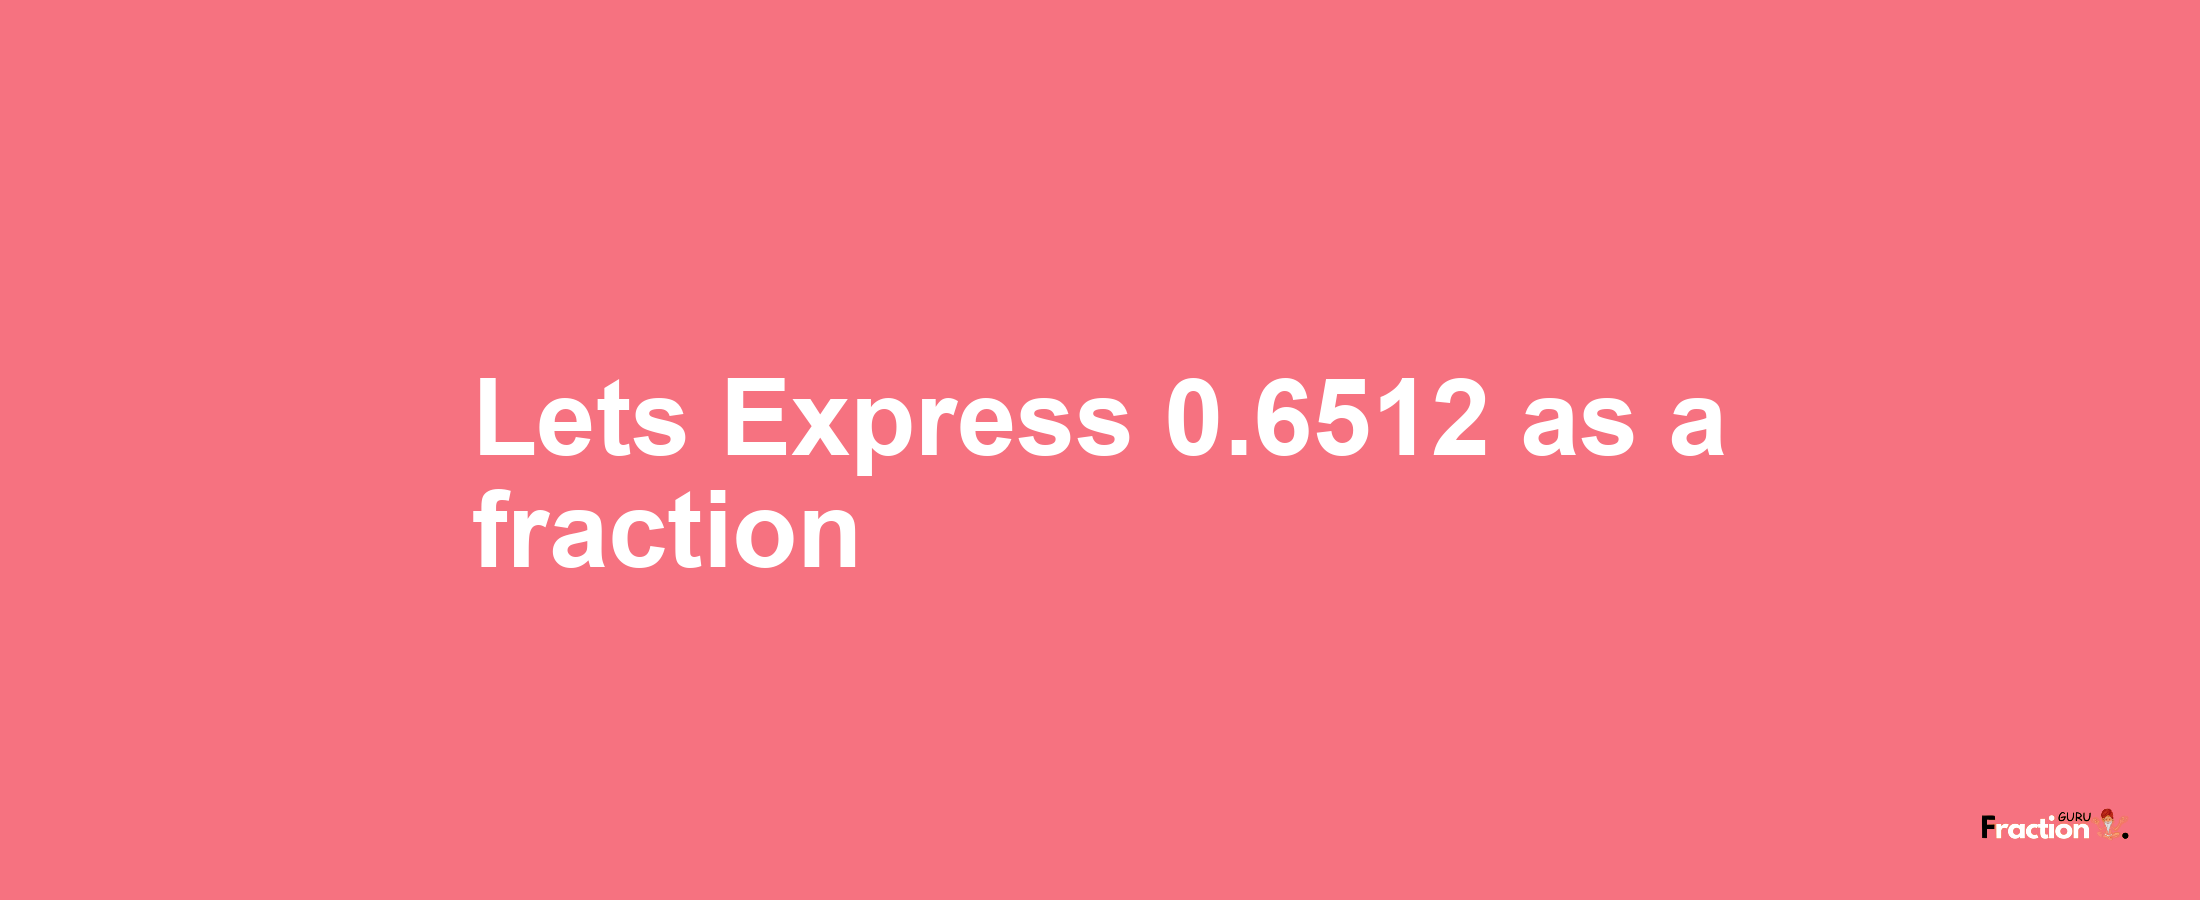 Lets Express 0.6512 as afraction